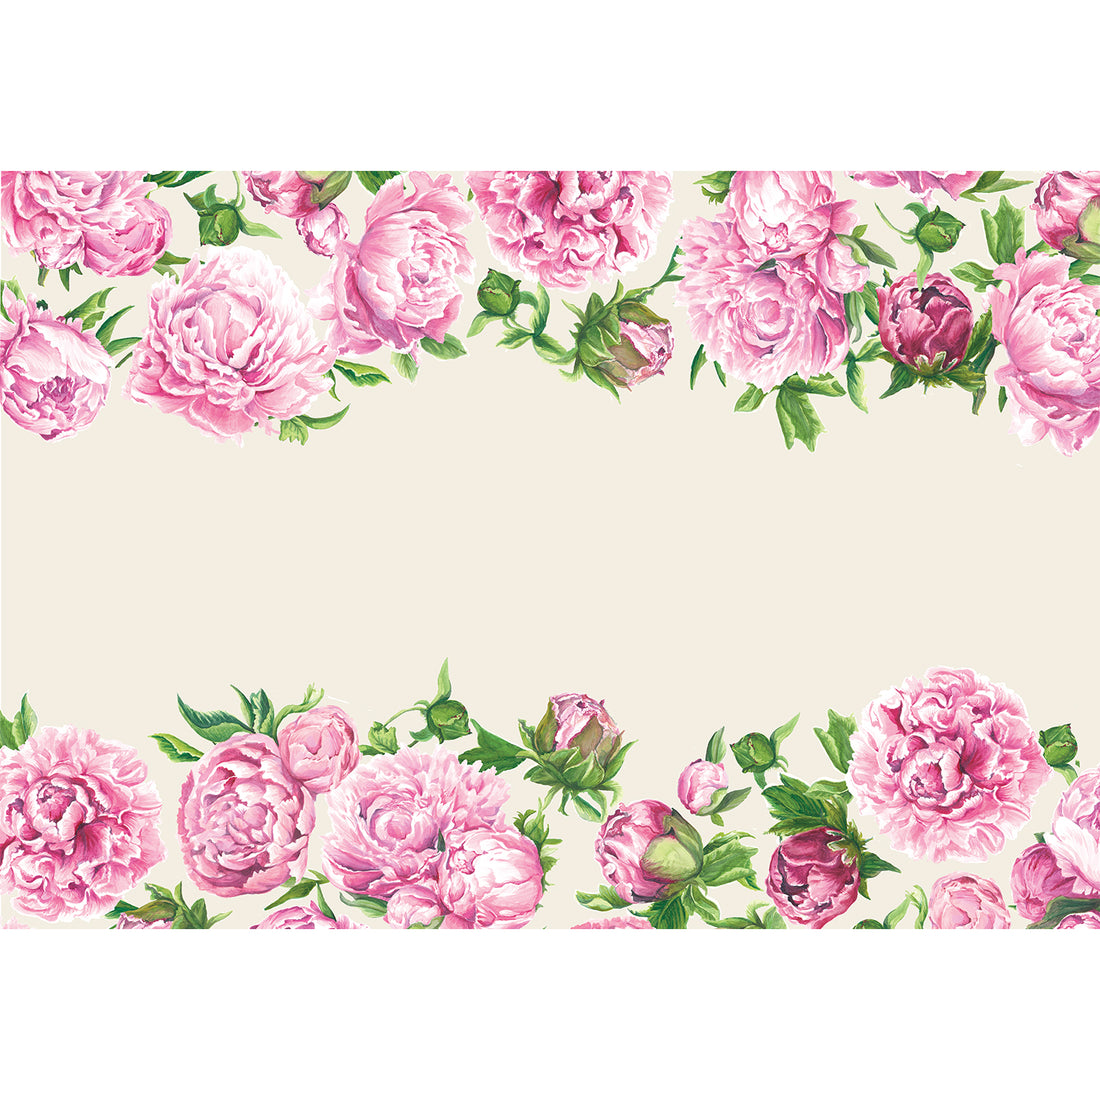 A paper runner roll with large, pink, illustrated peony blooms and green leaves decorating both edges of the runner, leaving the white background open down the middle for a personalized message.